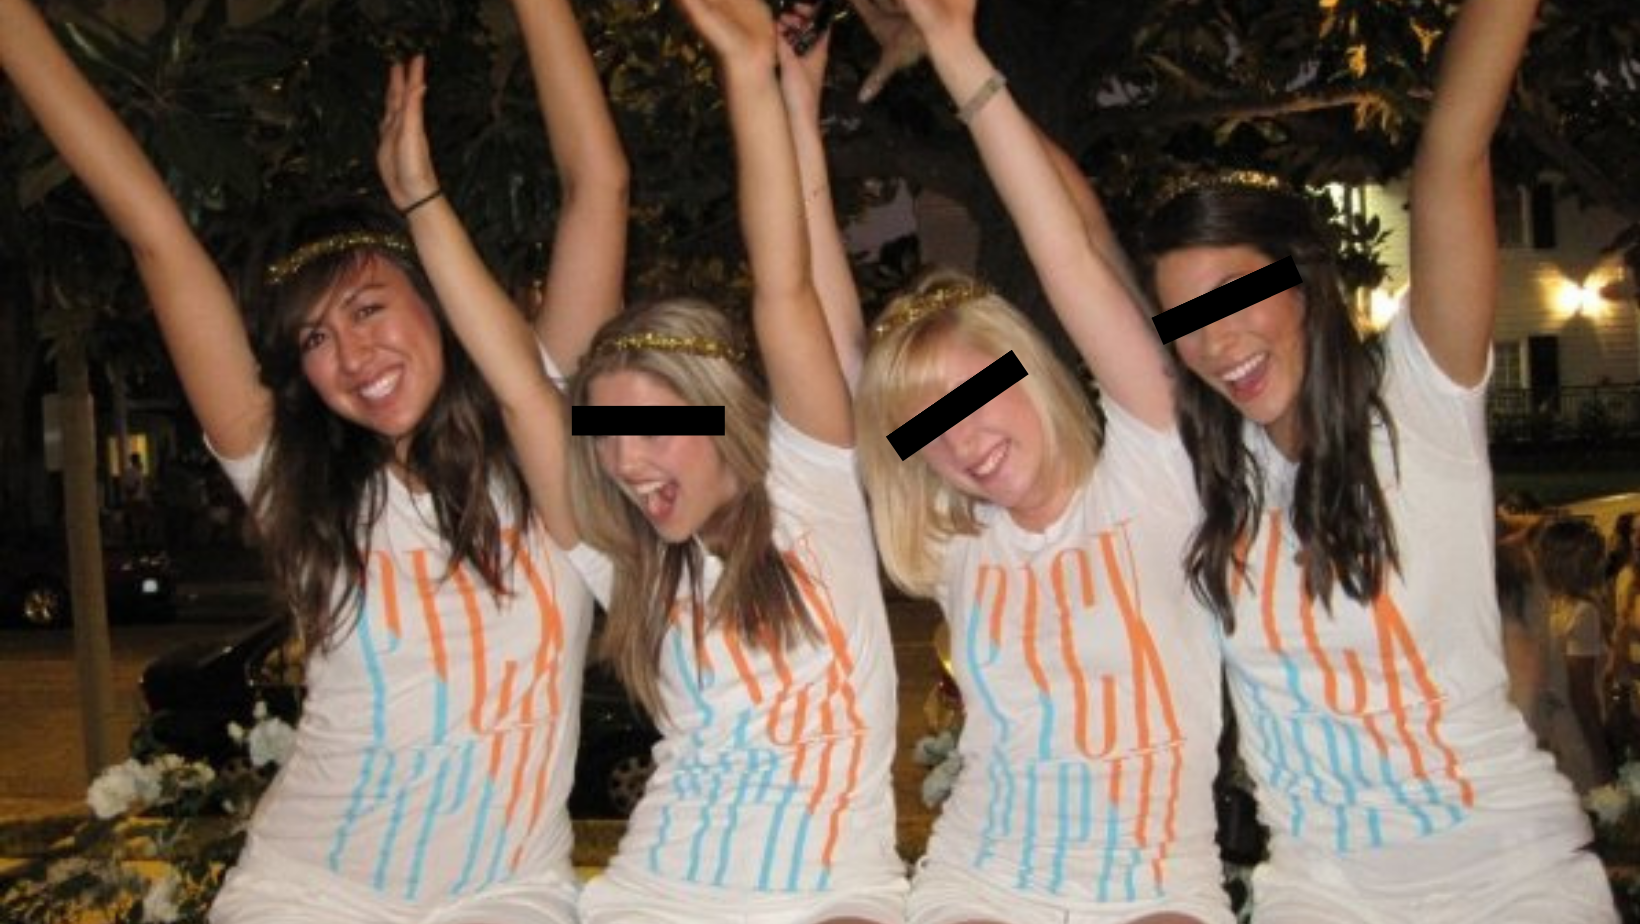 amber eastabrooks recommends sorority girls getting hazed pic